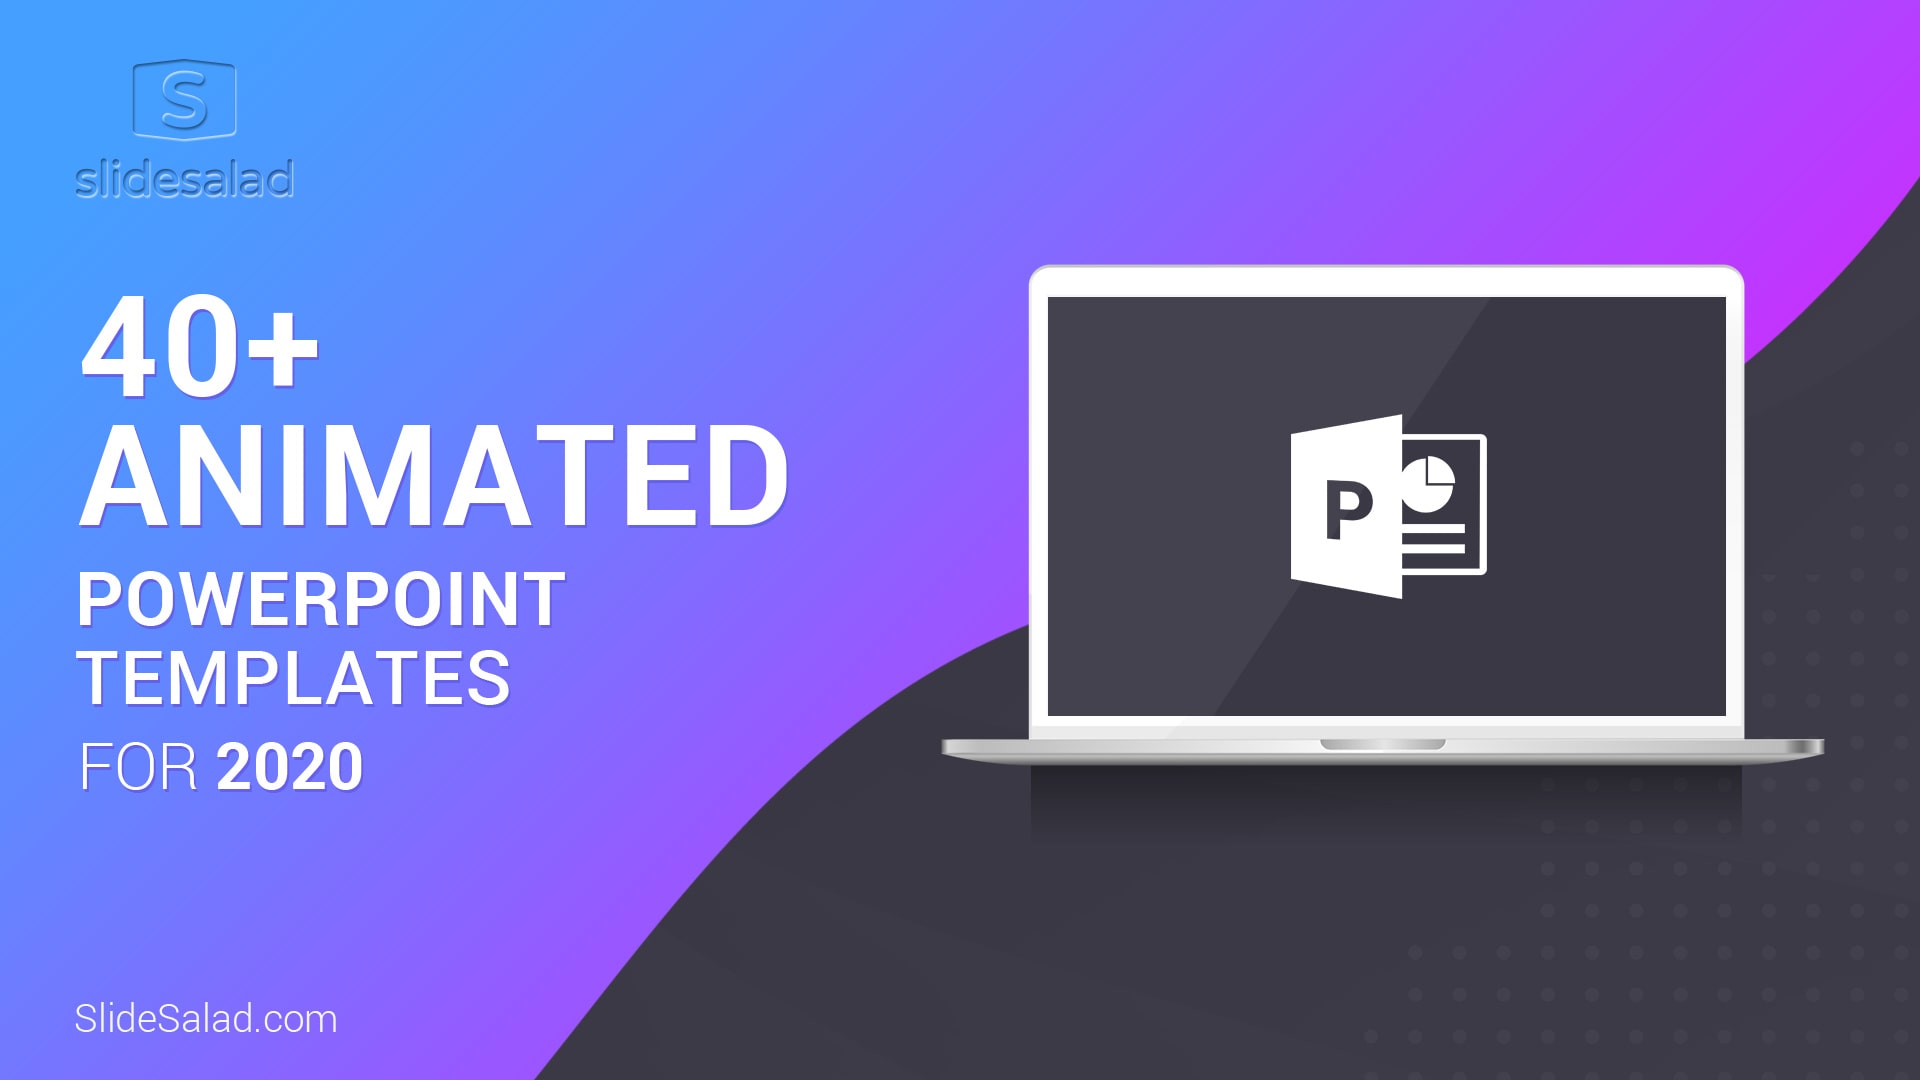 Animated PowerPoint (PPT) Templates for Presentations, 2020